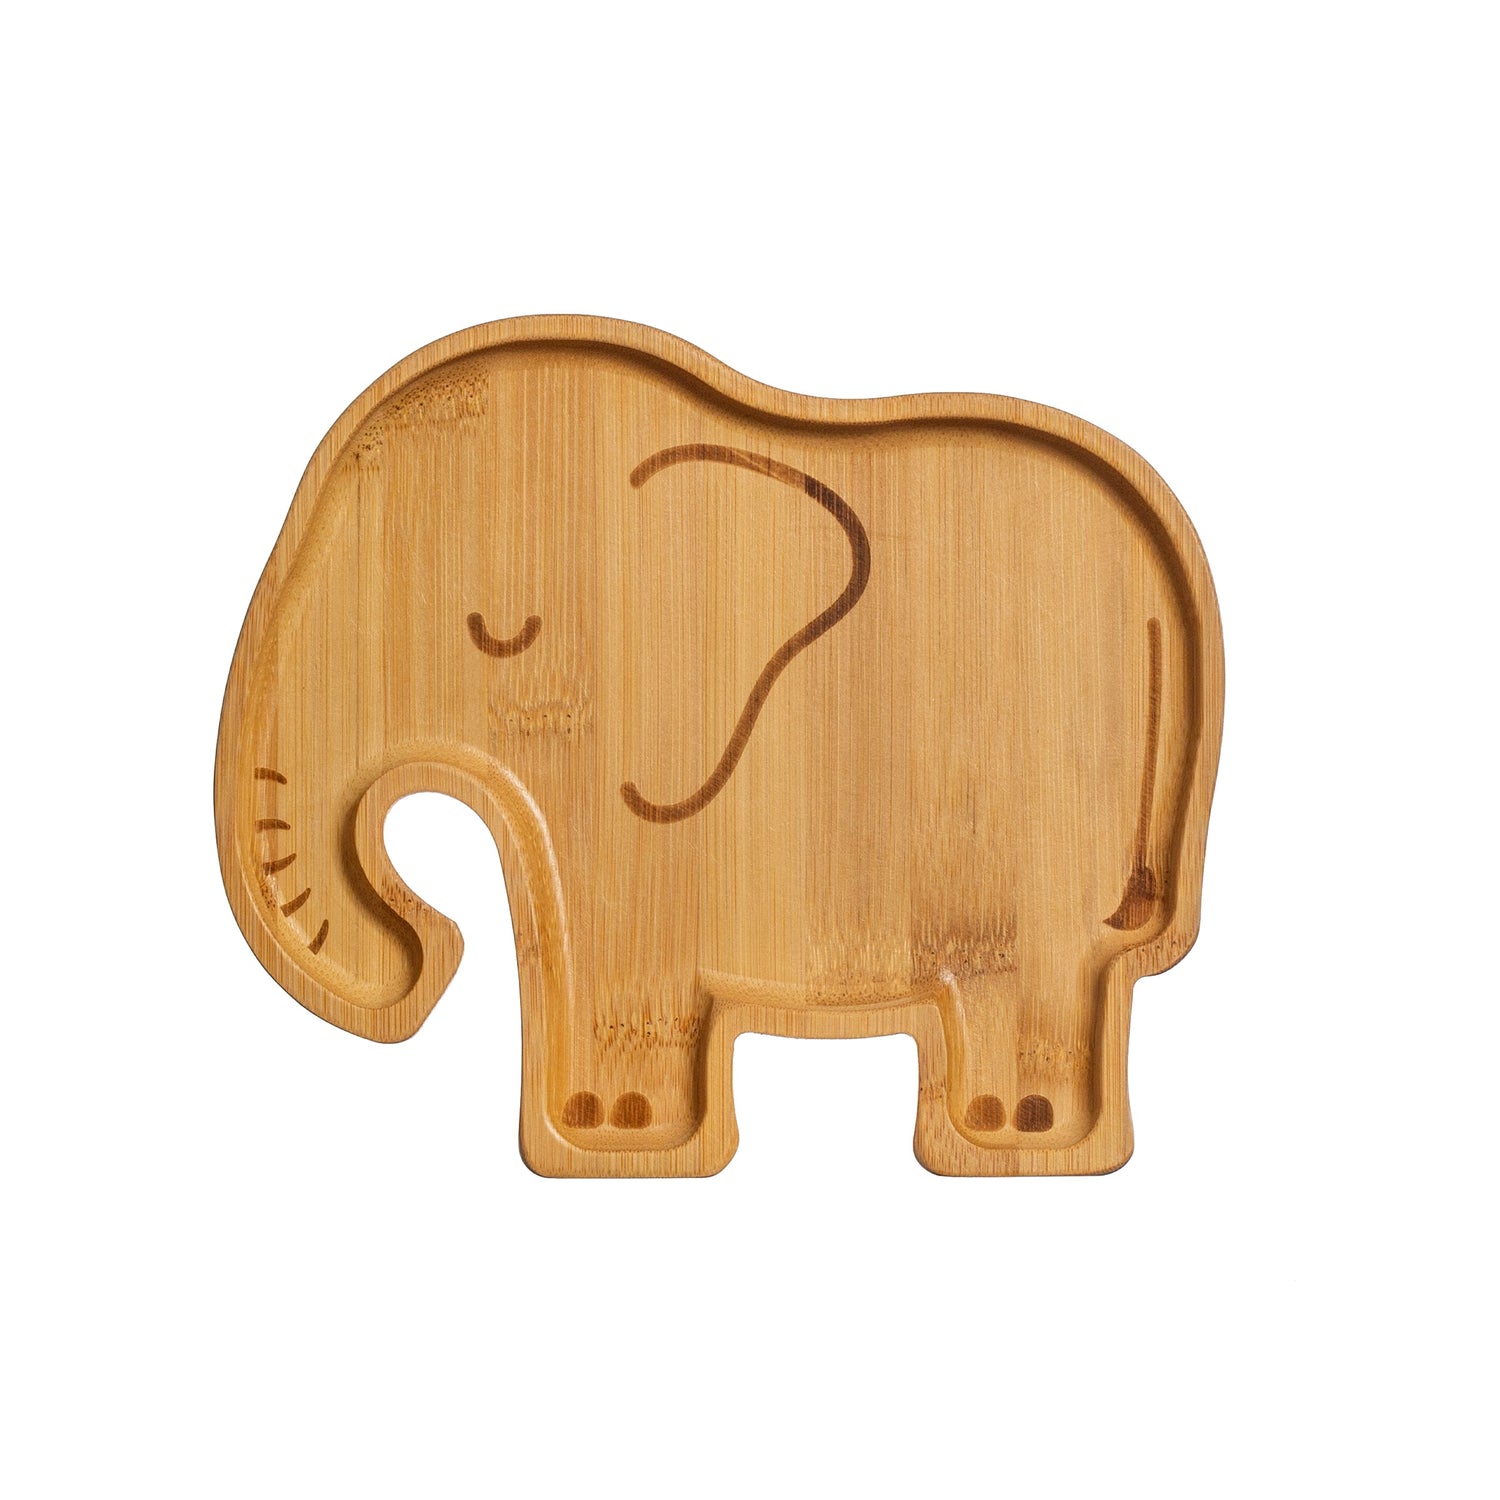 A planet-friendly everyday reusable, this gorgeous bamboo plate features a lovely elephant design.